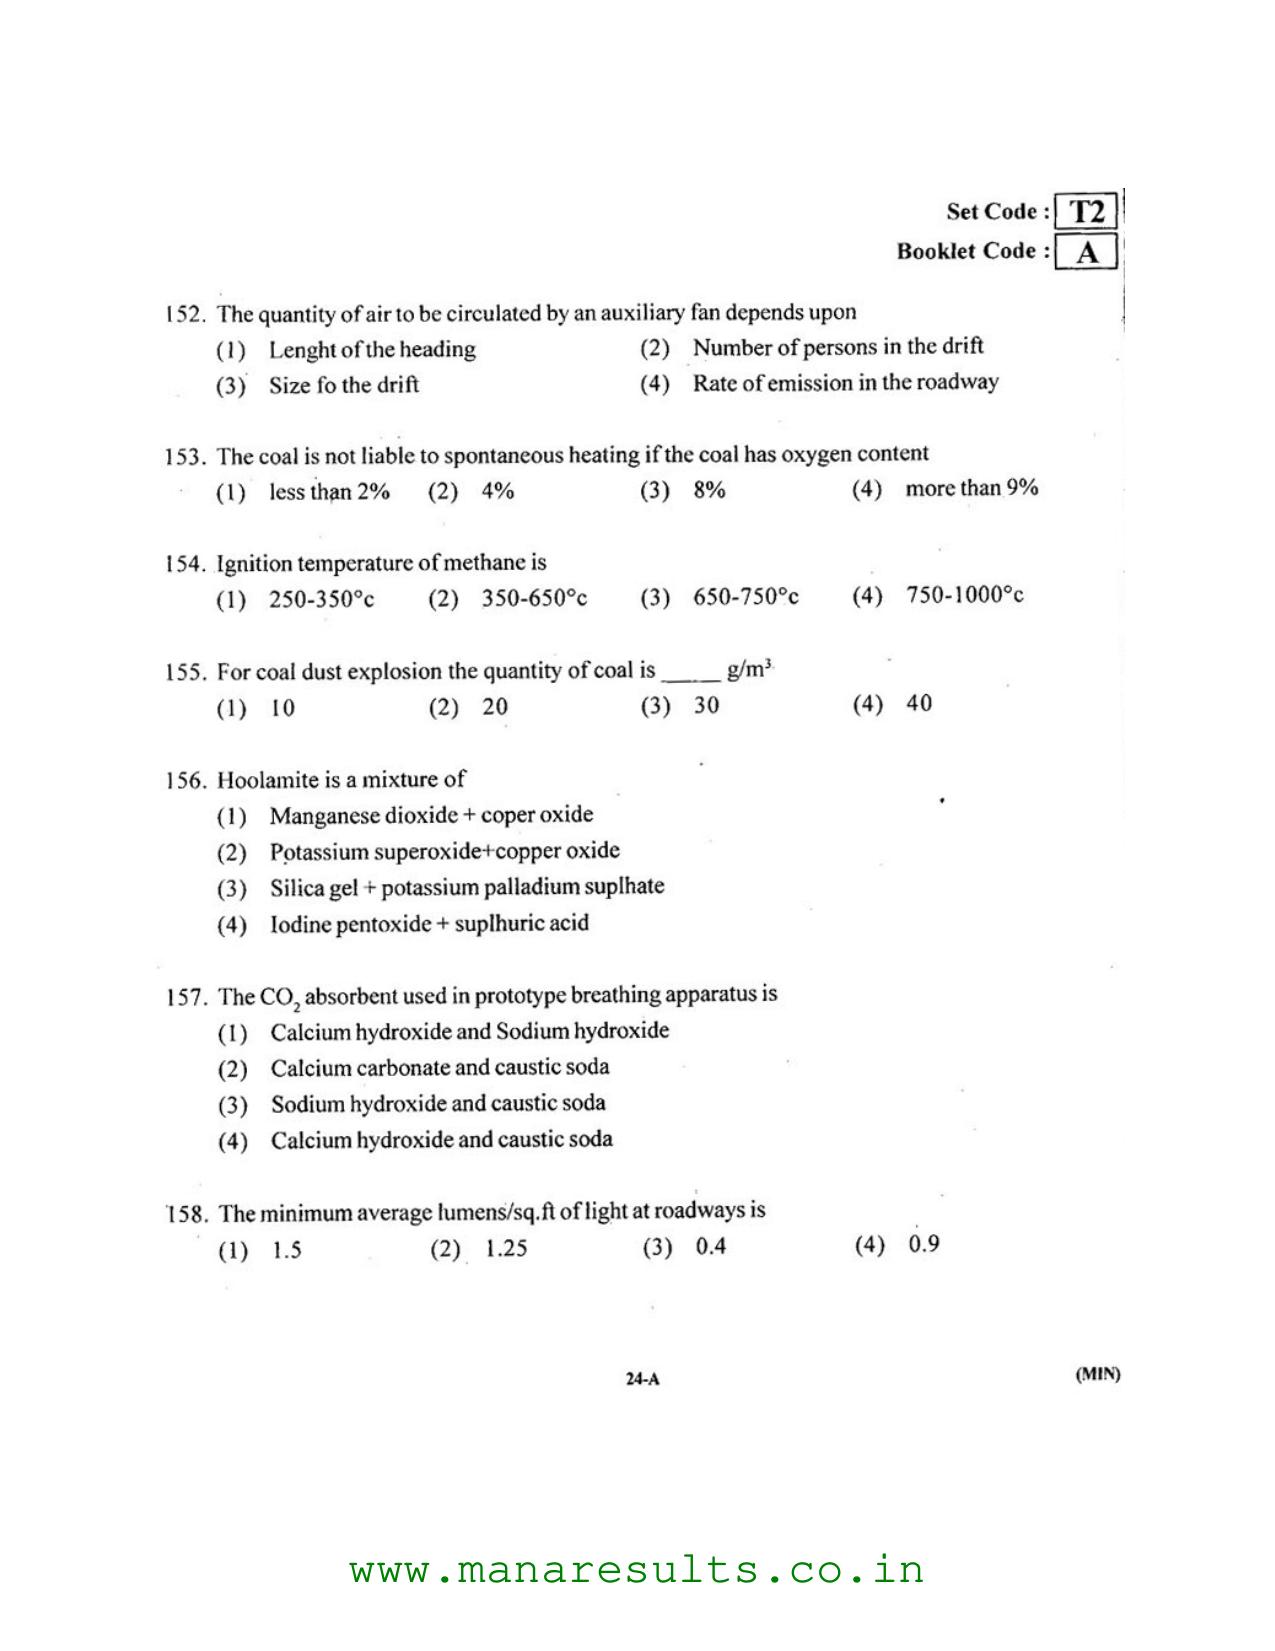 AP ECET 2016 Mining Engineering Old Previous Question Papers - Page 23